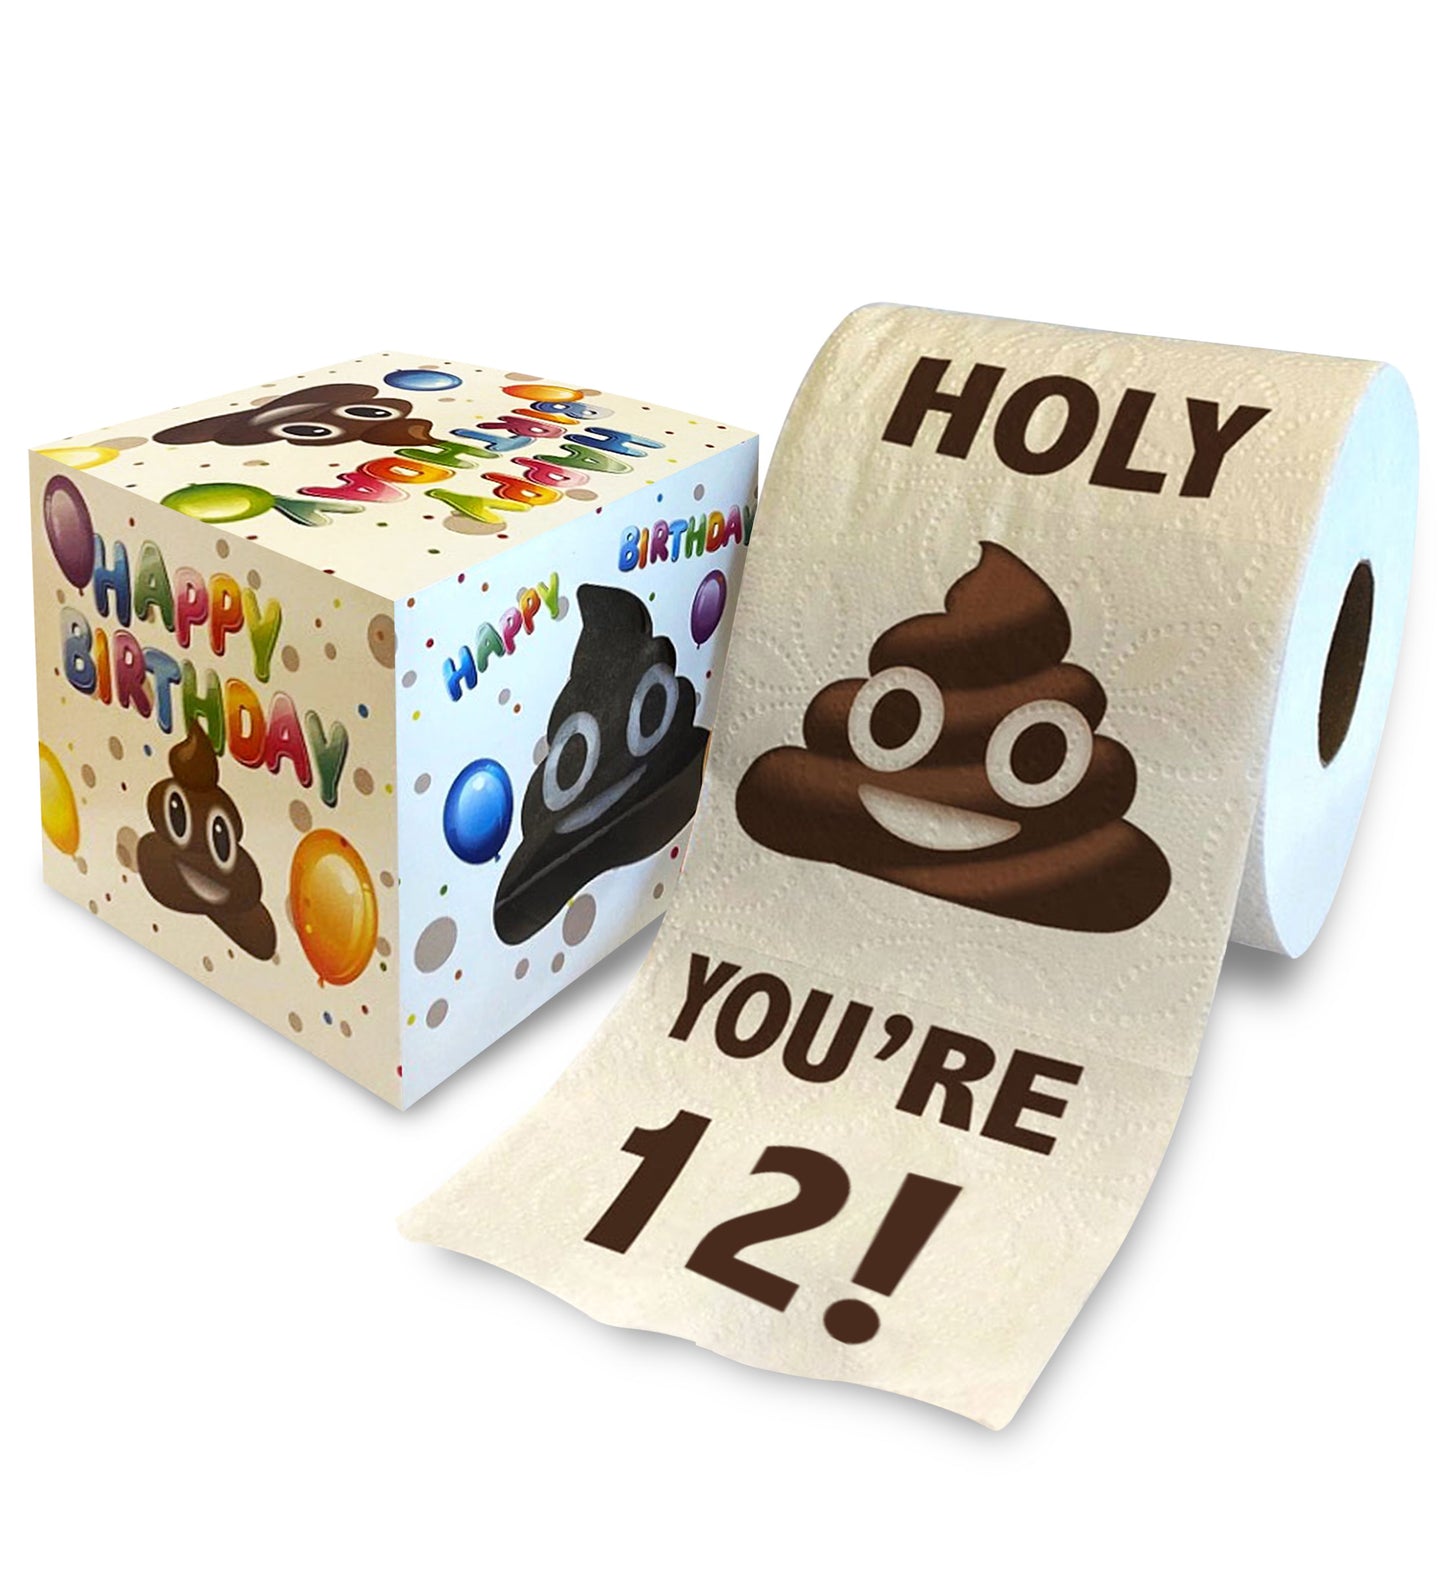 Printed TP Holy Poop You're 12 Printed Toilet Paper Gag Gift – Happy 12th Birthday Funny Toilet Paper For Surprise, Decor, Bday Fun Gift - 500 Sheets